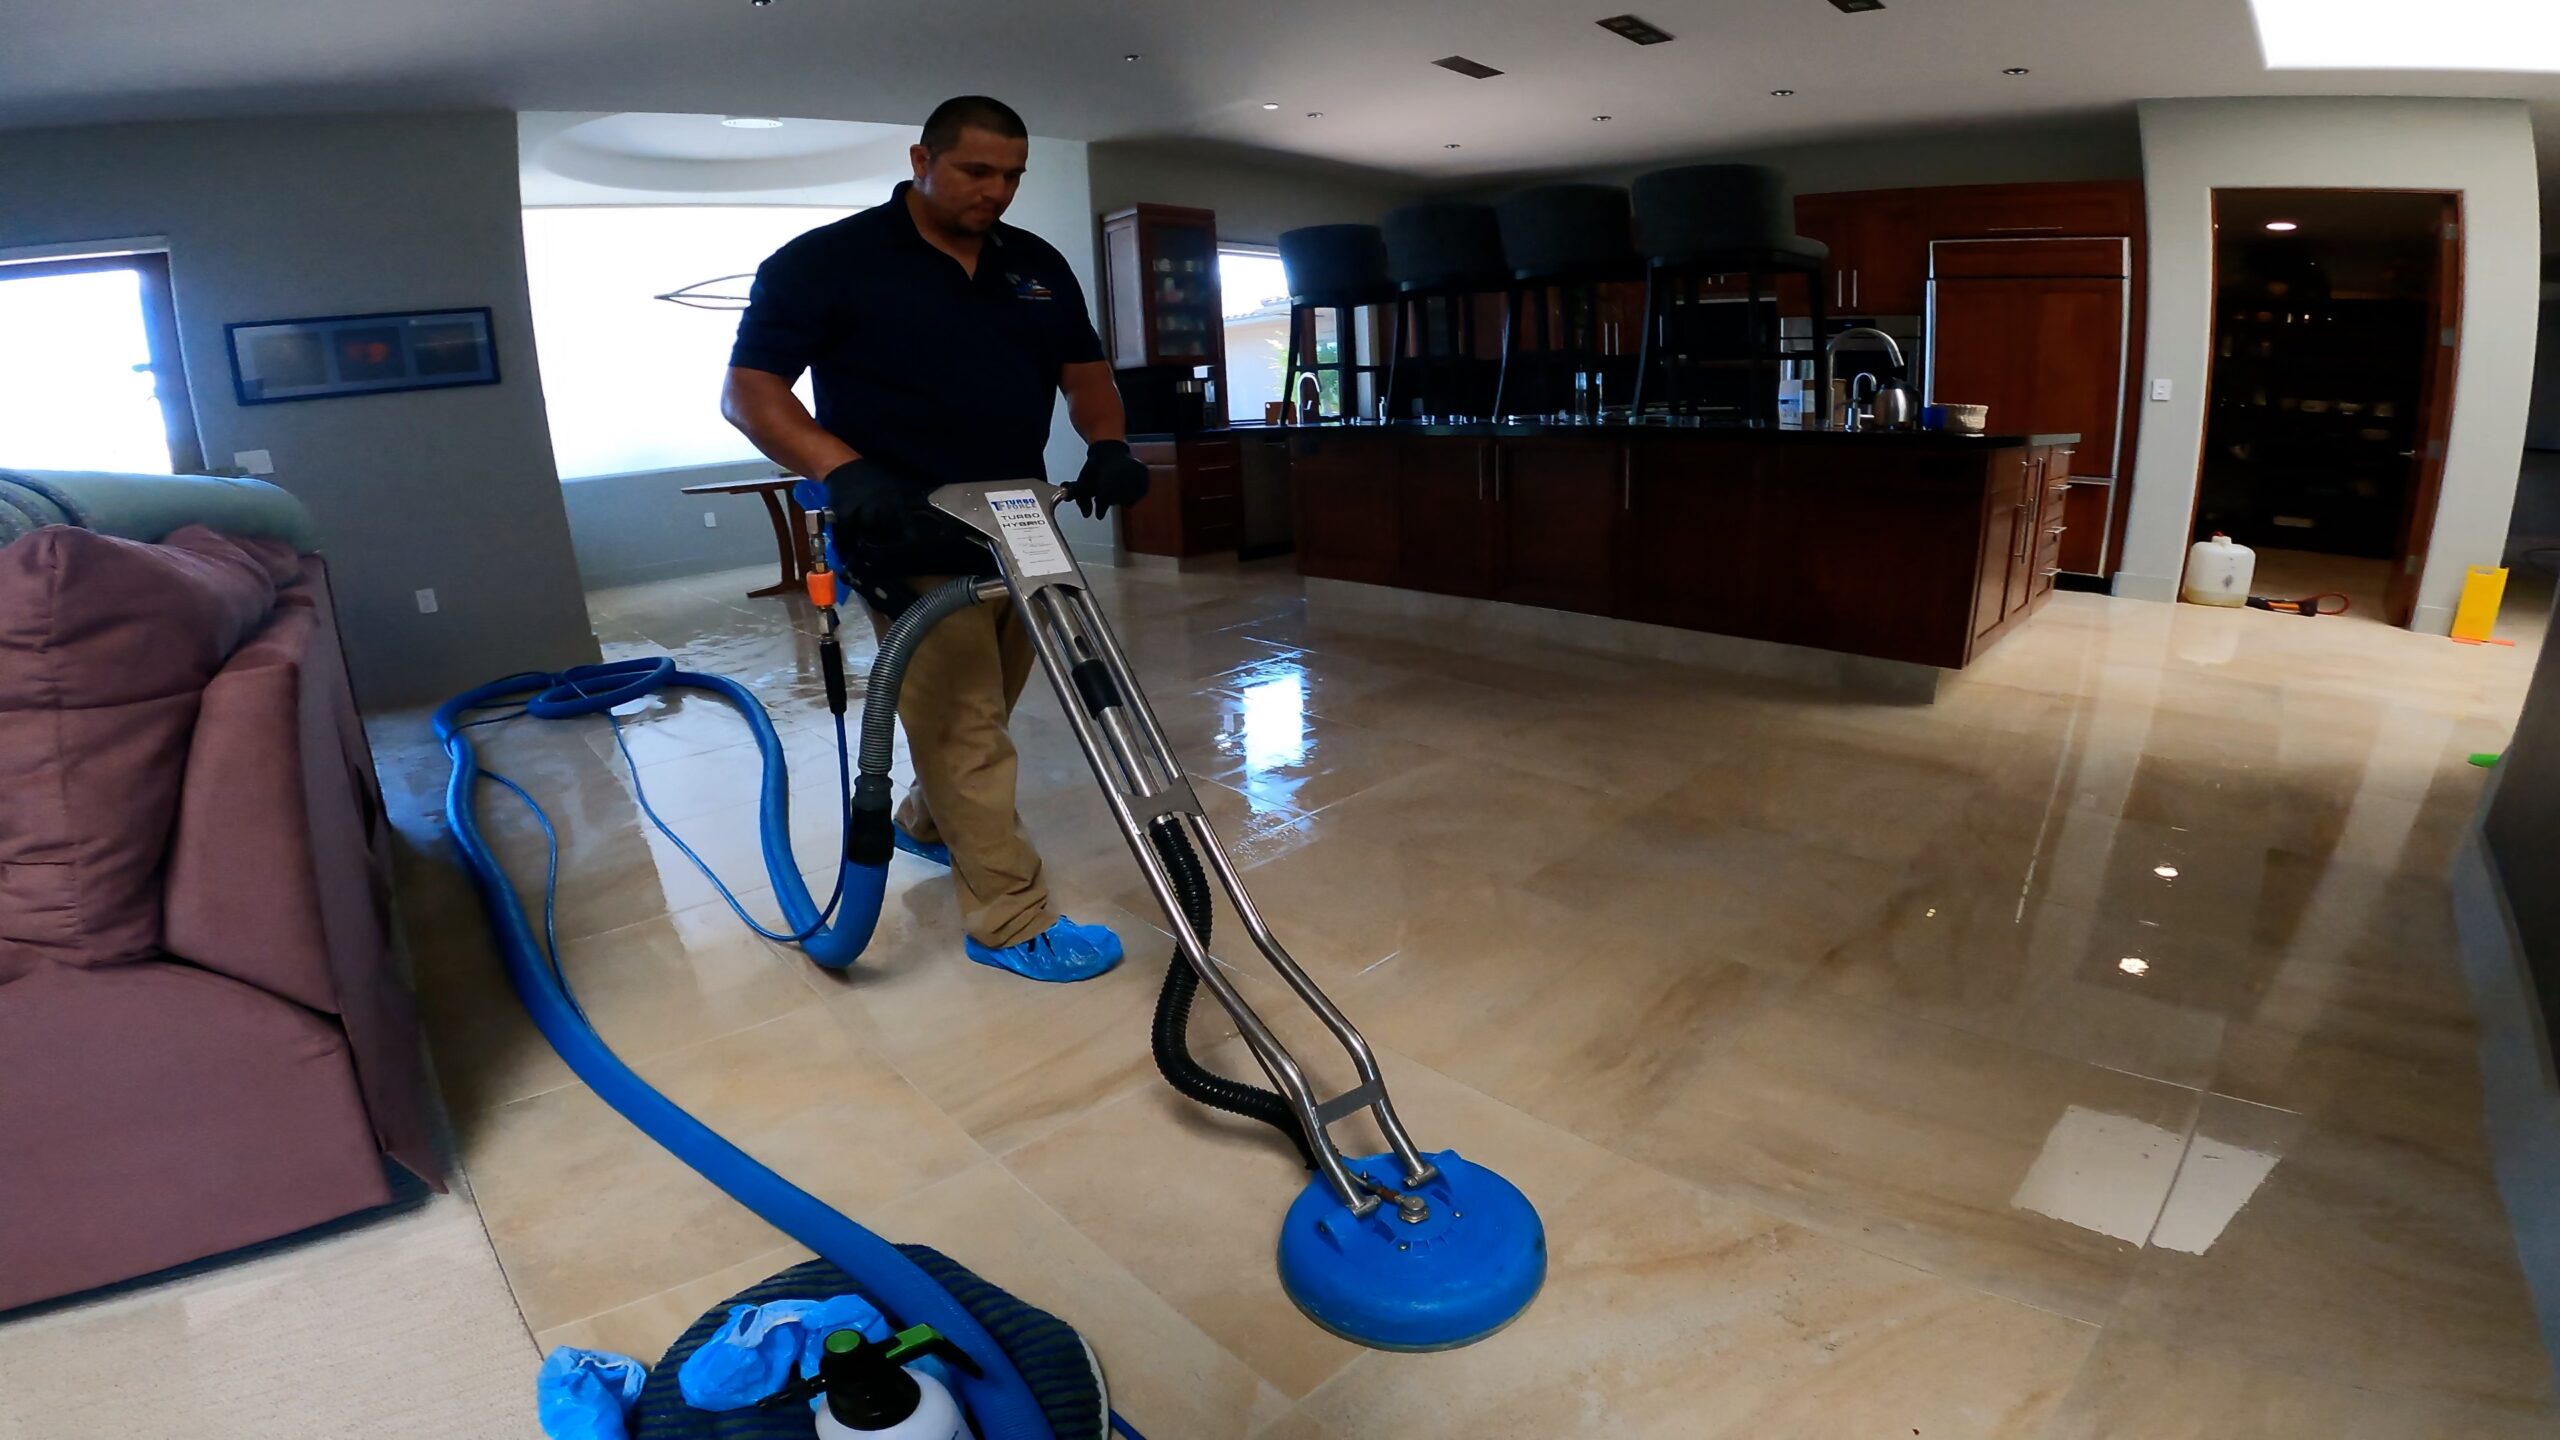 Carpets Furniture Tile Grout Air Ducts Cleaning Services